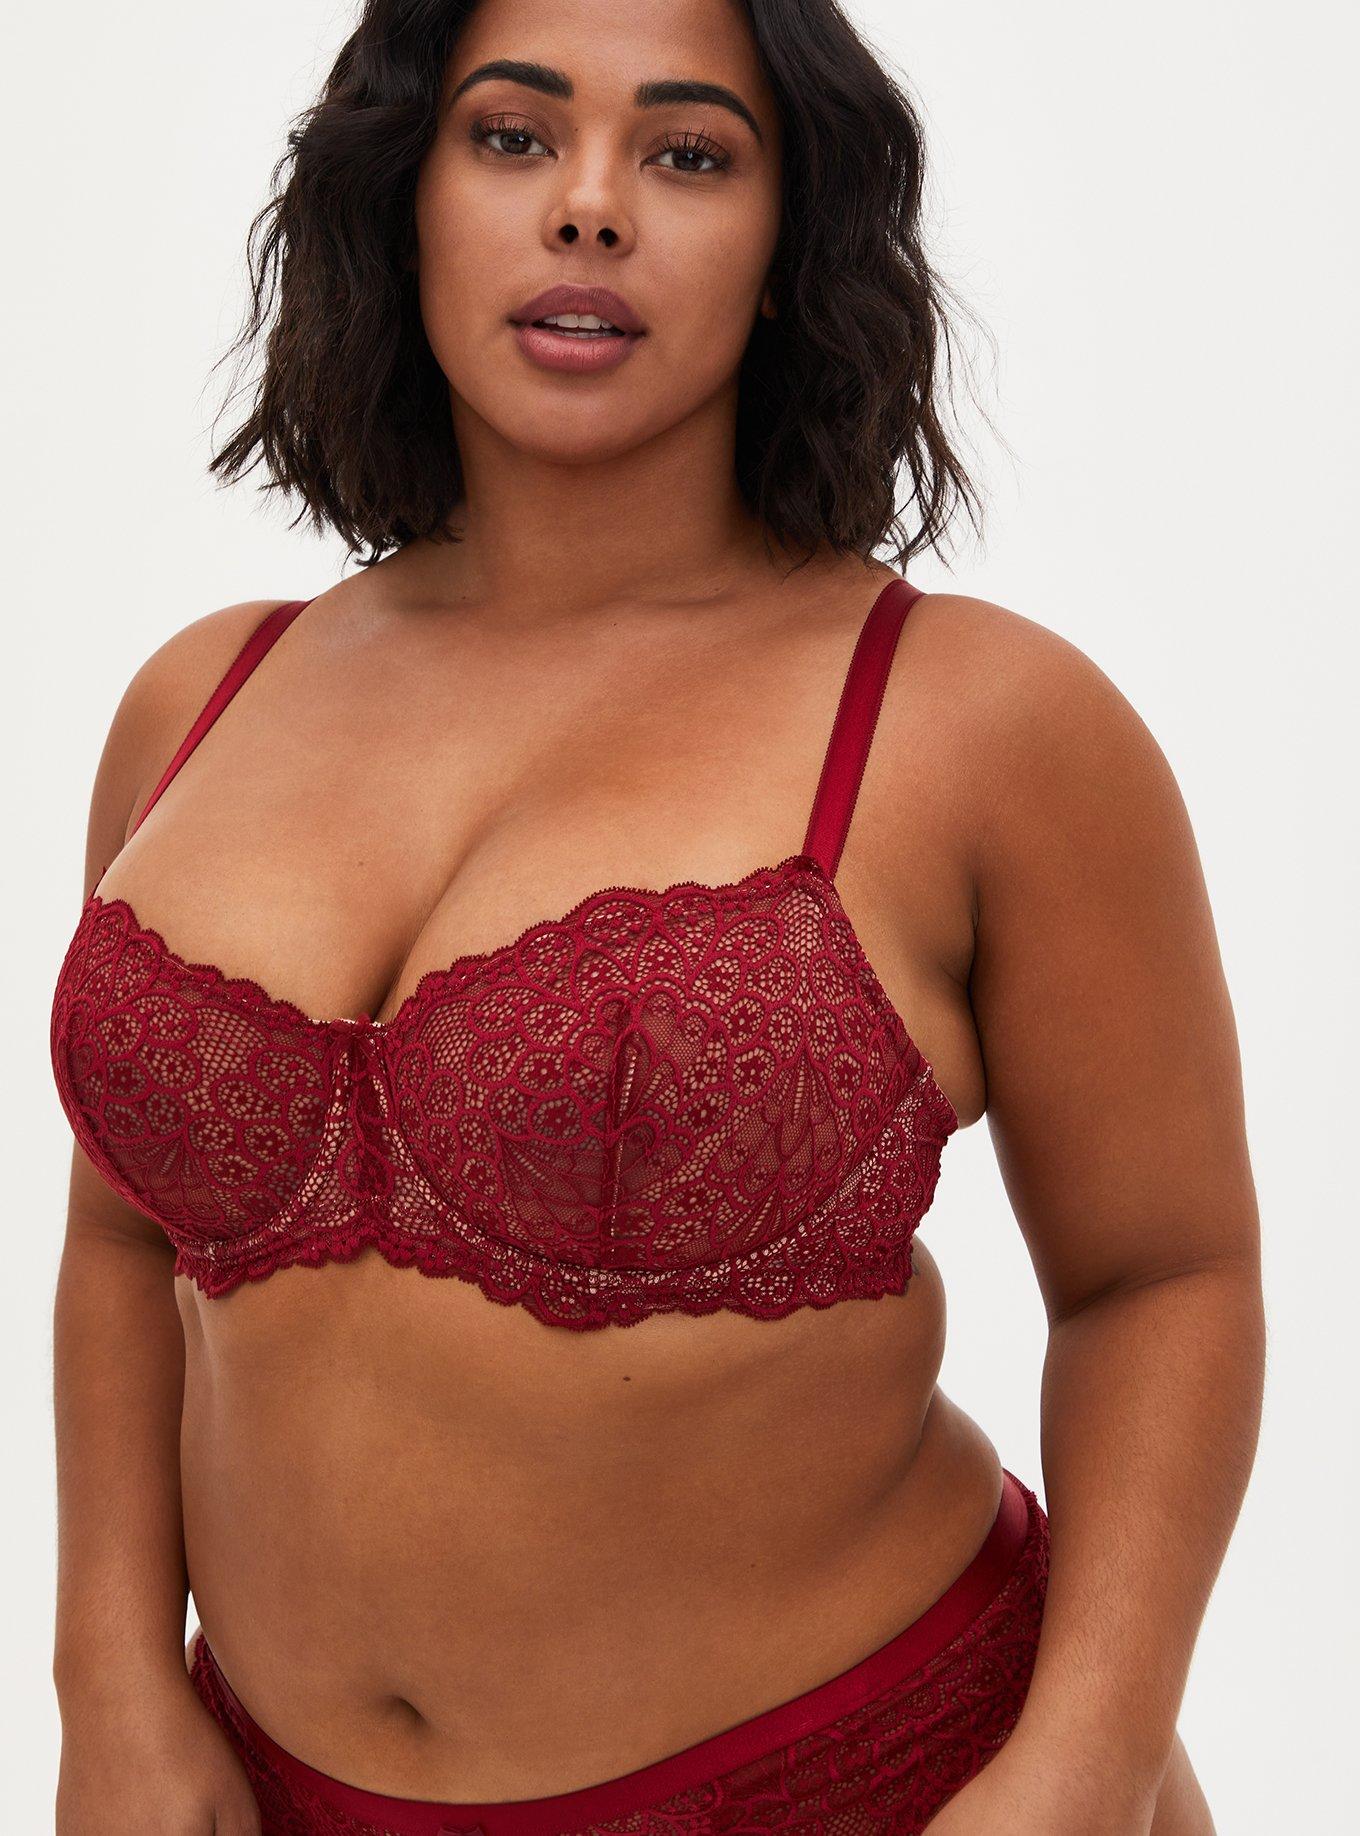 Seriously, What Is A Balconette Bra? Or Is It A Balcony Bra? - What Is The  Purpose of Balconette or Balcony Bras? - ThirdLove